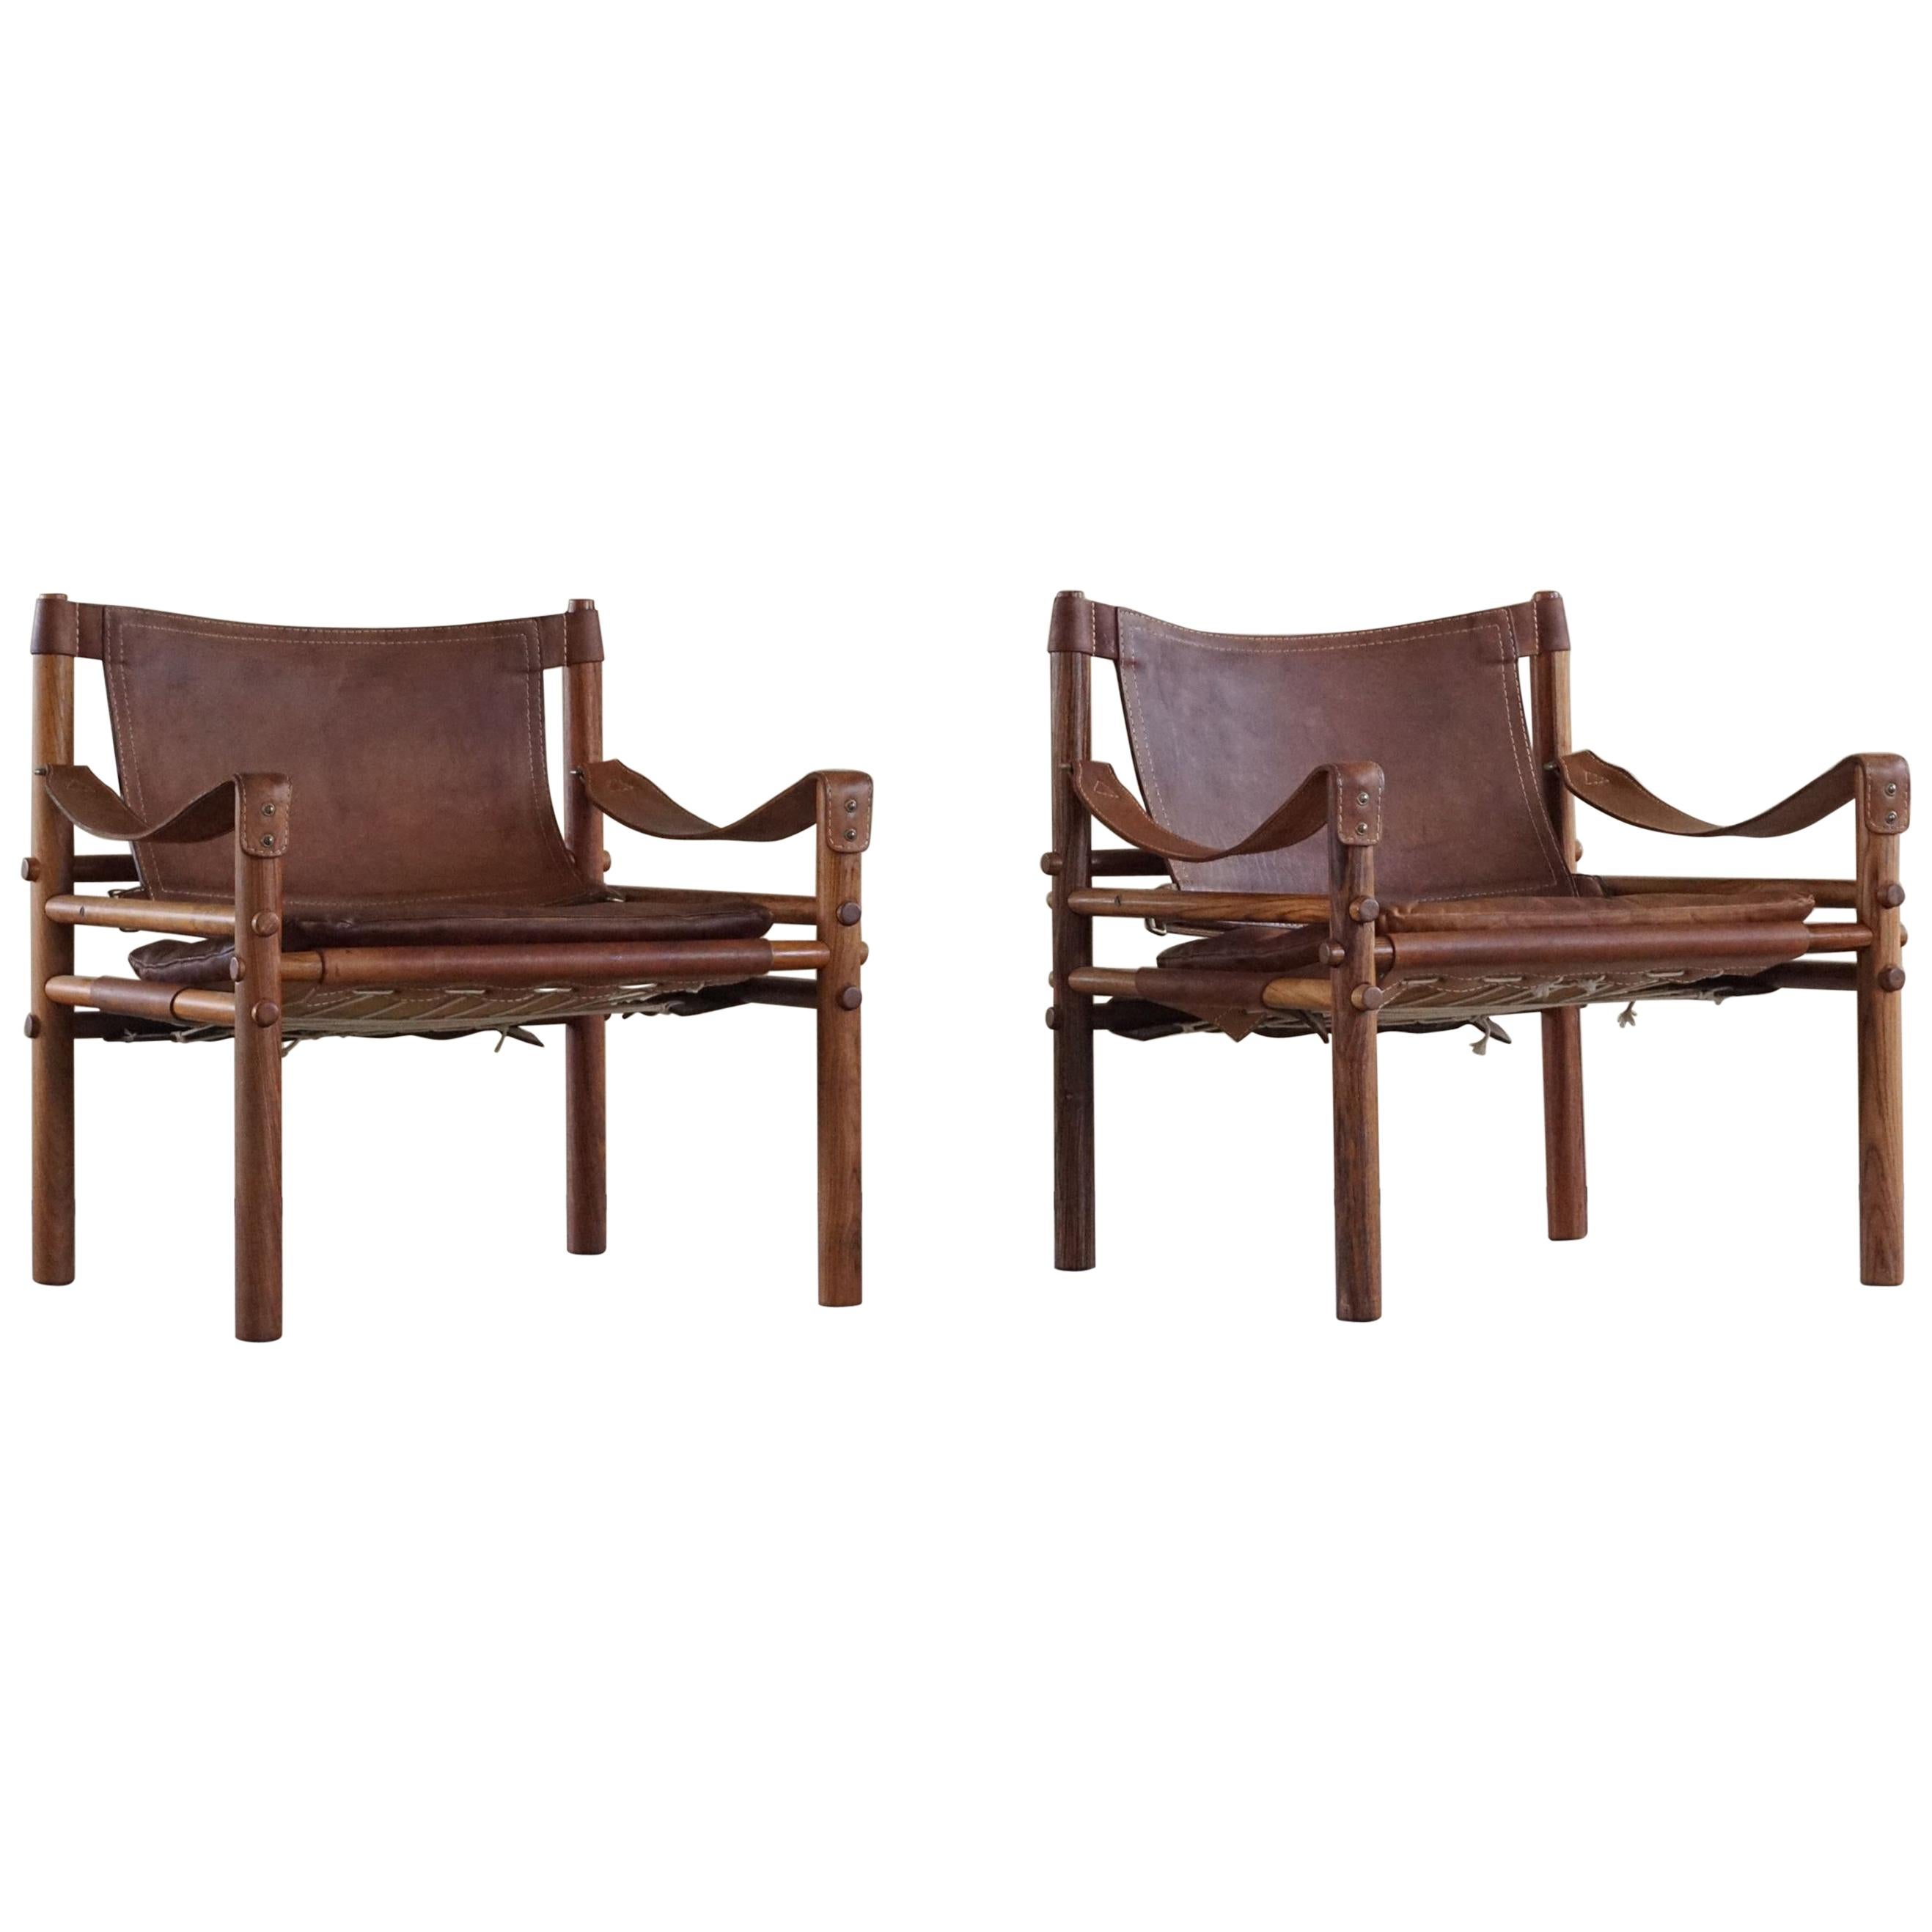 Pair of Sirocco Safari Chairs, Made by Arne Norell AB in Aneby Sweden, 1960s